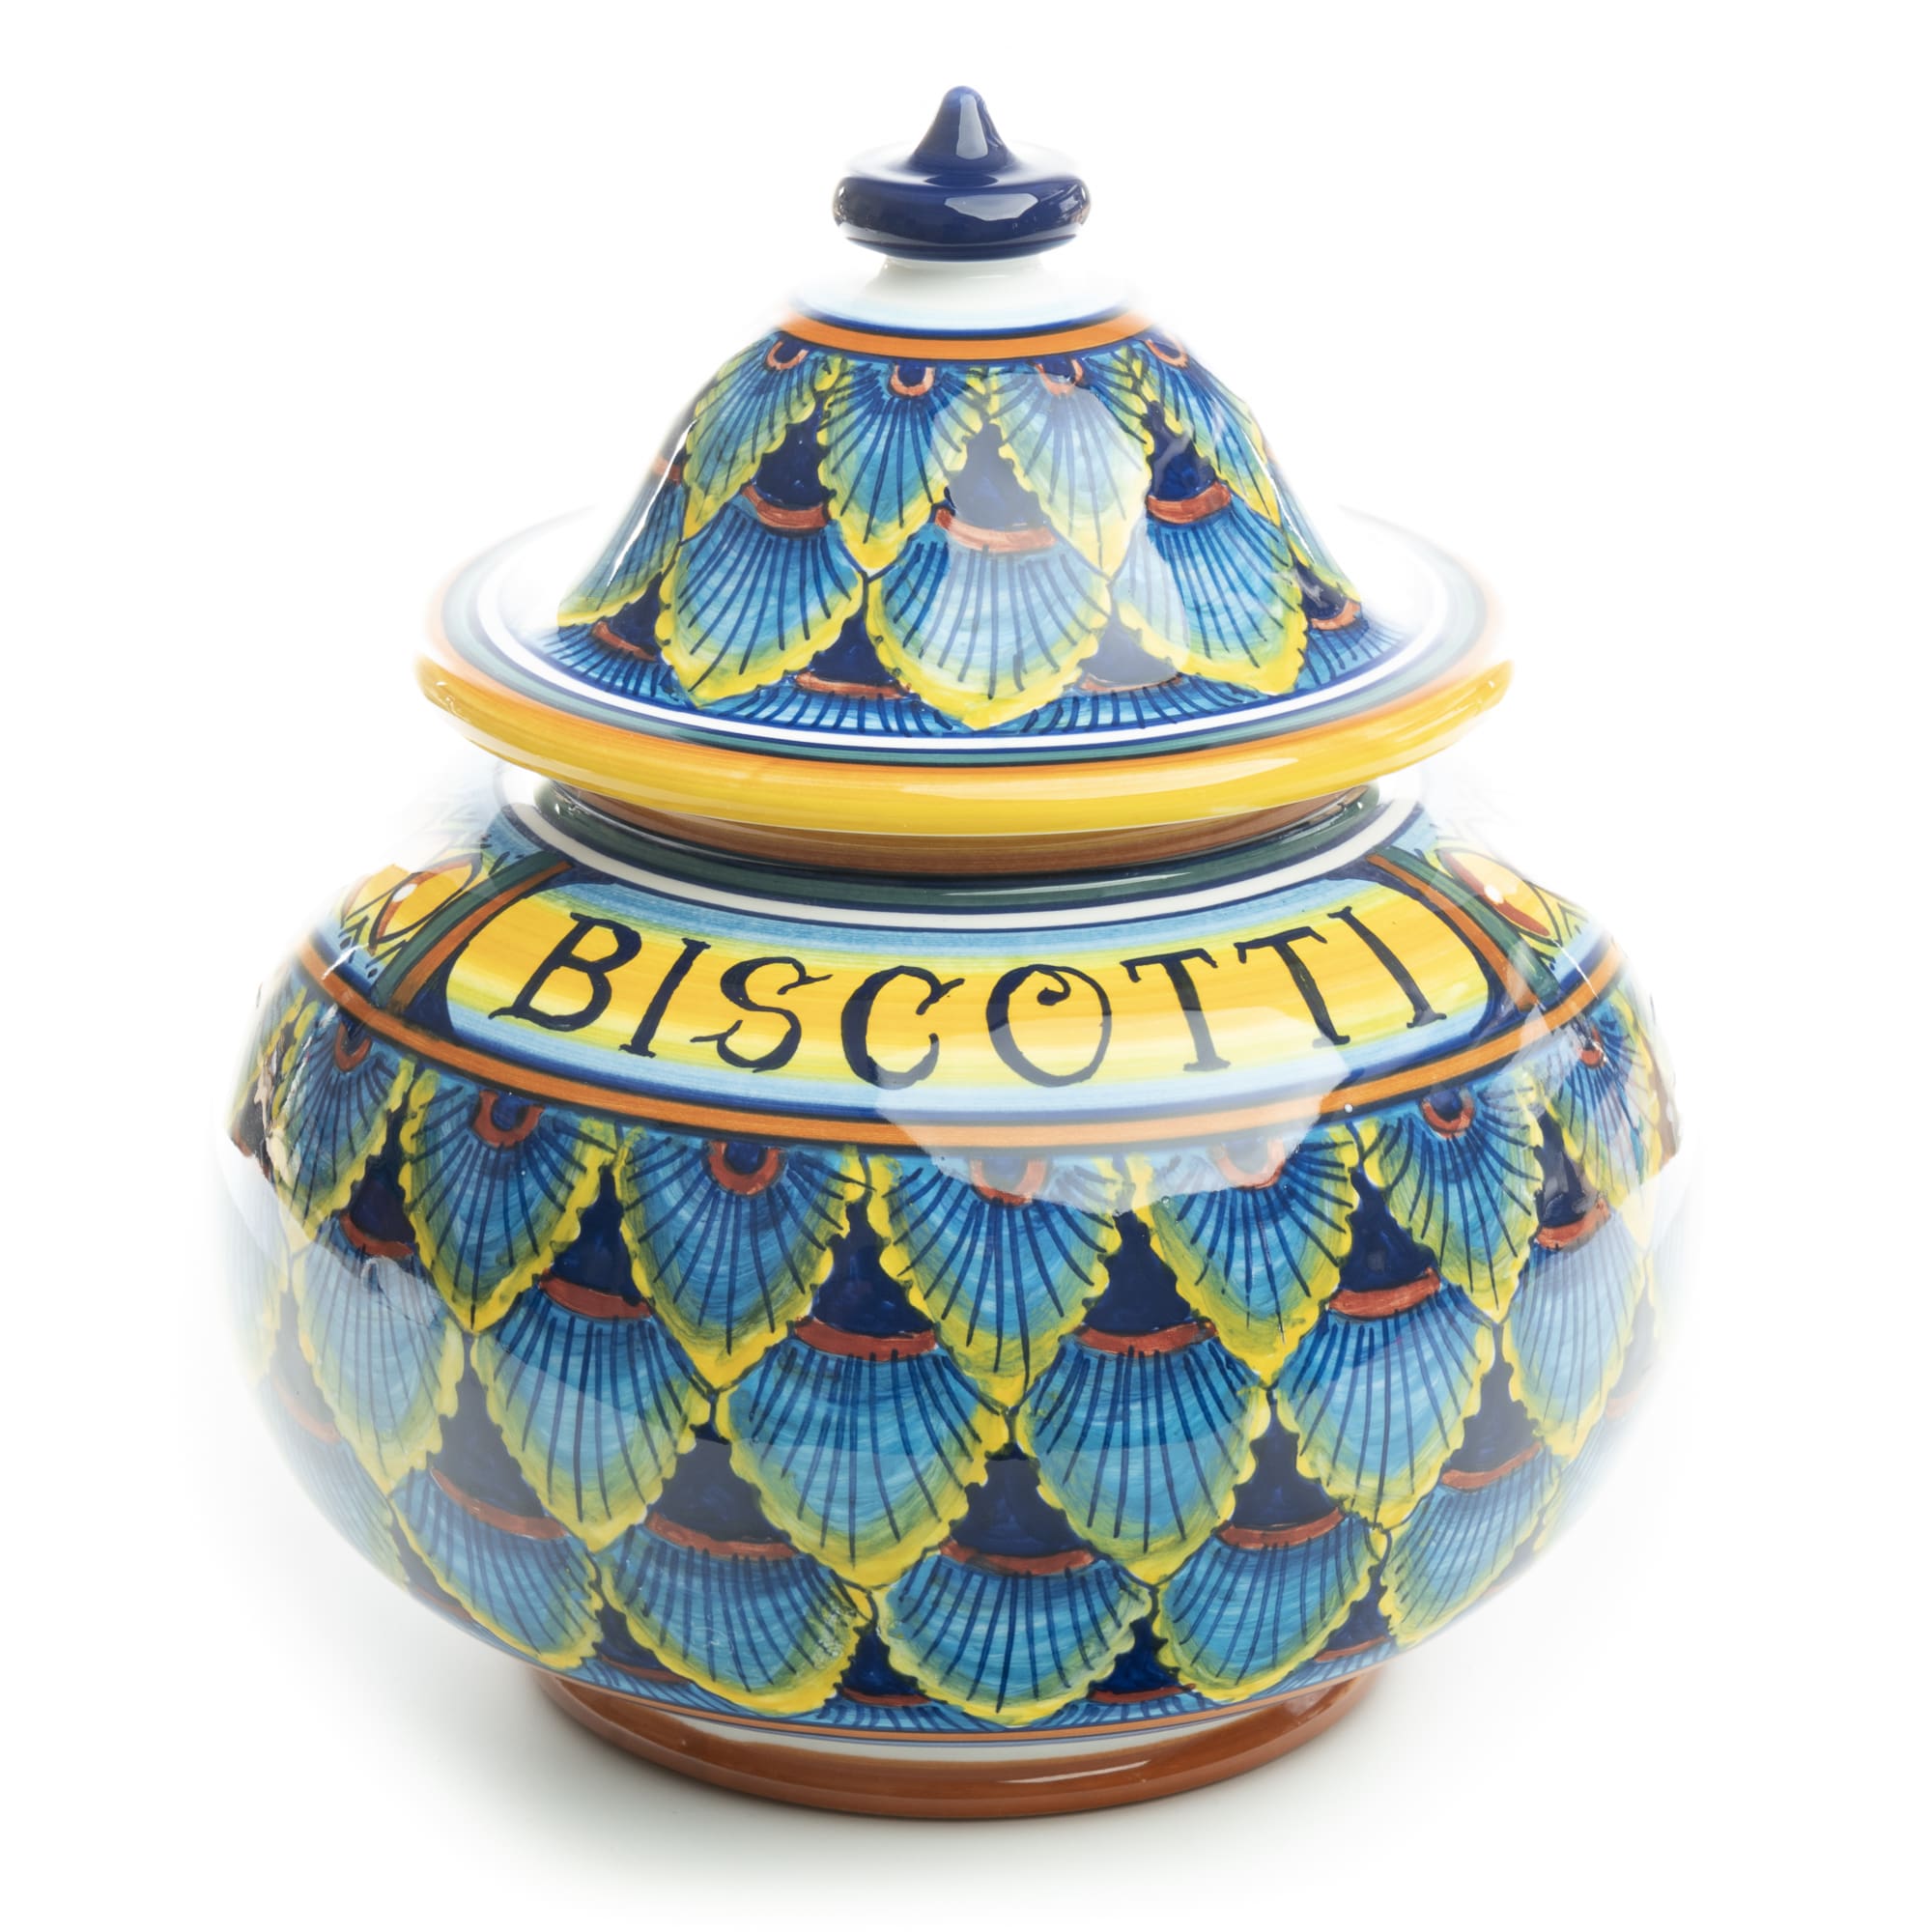 Collectible Majolica Round Biscotti Jar, ceramics, pottery, italian design, majolica, handmade, handcrafted, handpainted, home decor, kitchen art, home goods, deruta, majolica, Artisan, treasures, traditional art, modern art, gift ideas, style, SF, shop small business, artists, shop online, landmark store, legacy, one of a kind, limited edition, gift guide, gift shop, retail shop, decorations, shopping, italy, home staging, home decorating, home interiors